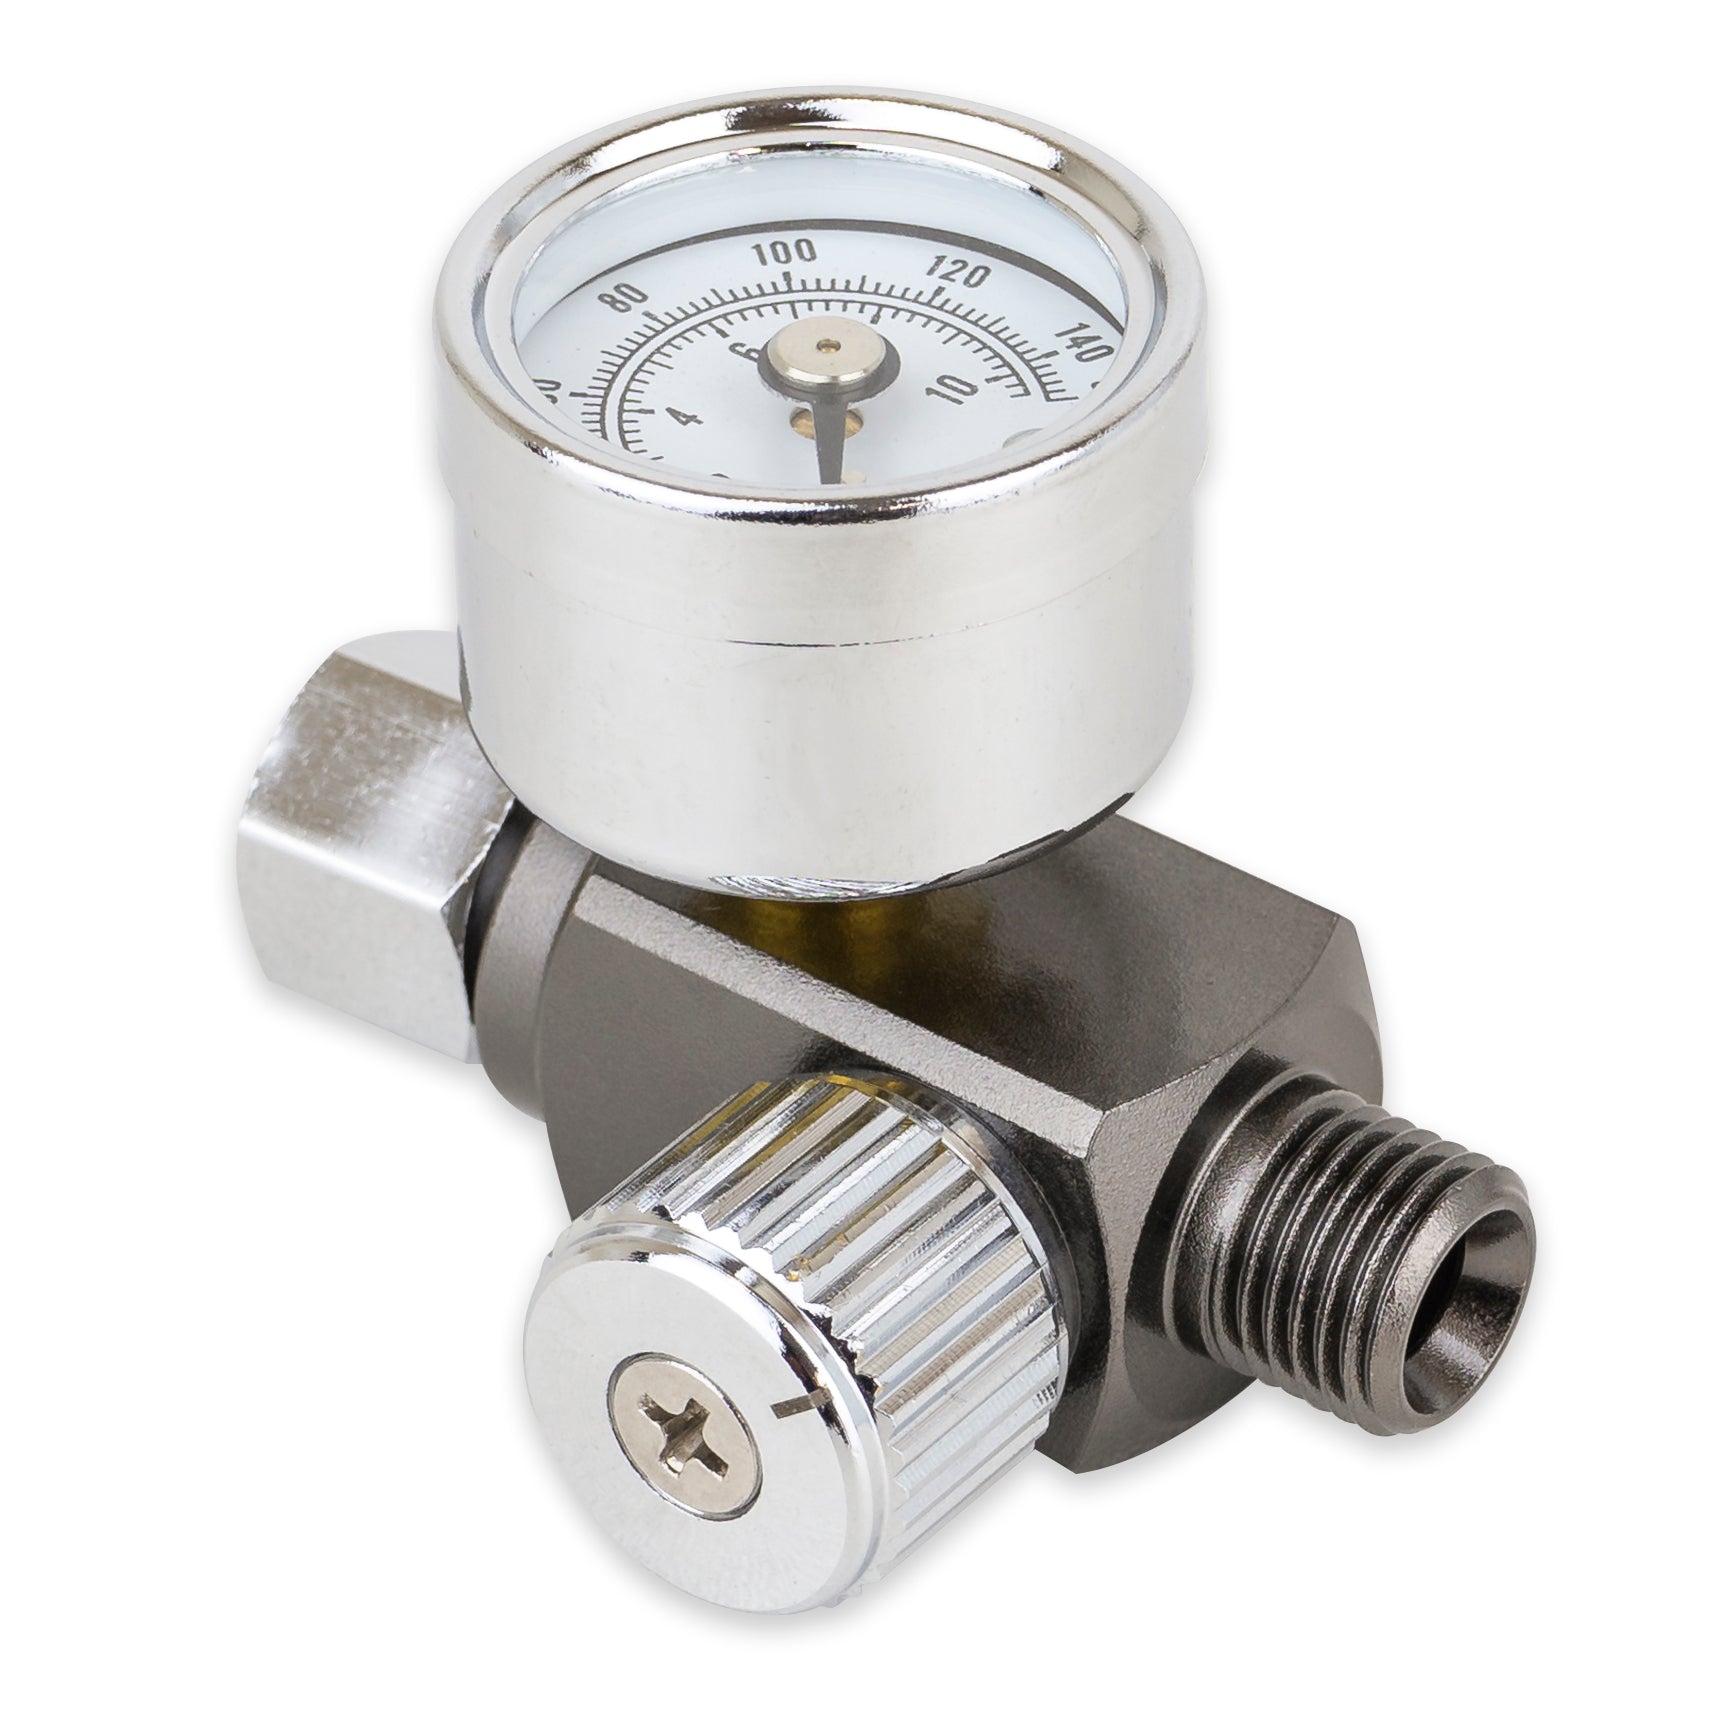 Details about   1/4" BSP Air Regulator Valve Tool Tail Pressure Gauge w/ Nozzle Fit For Spray 